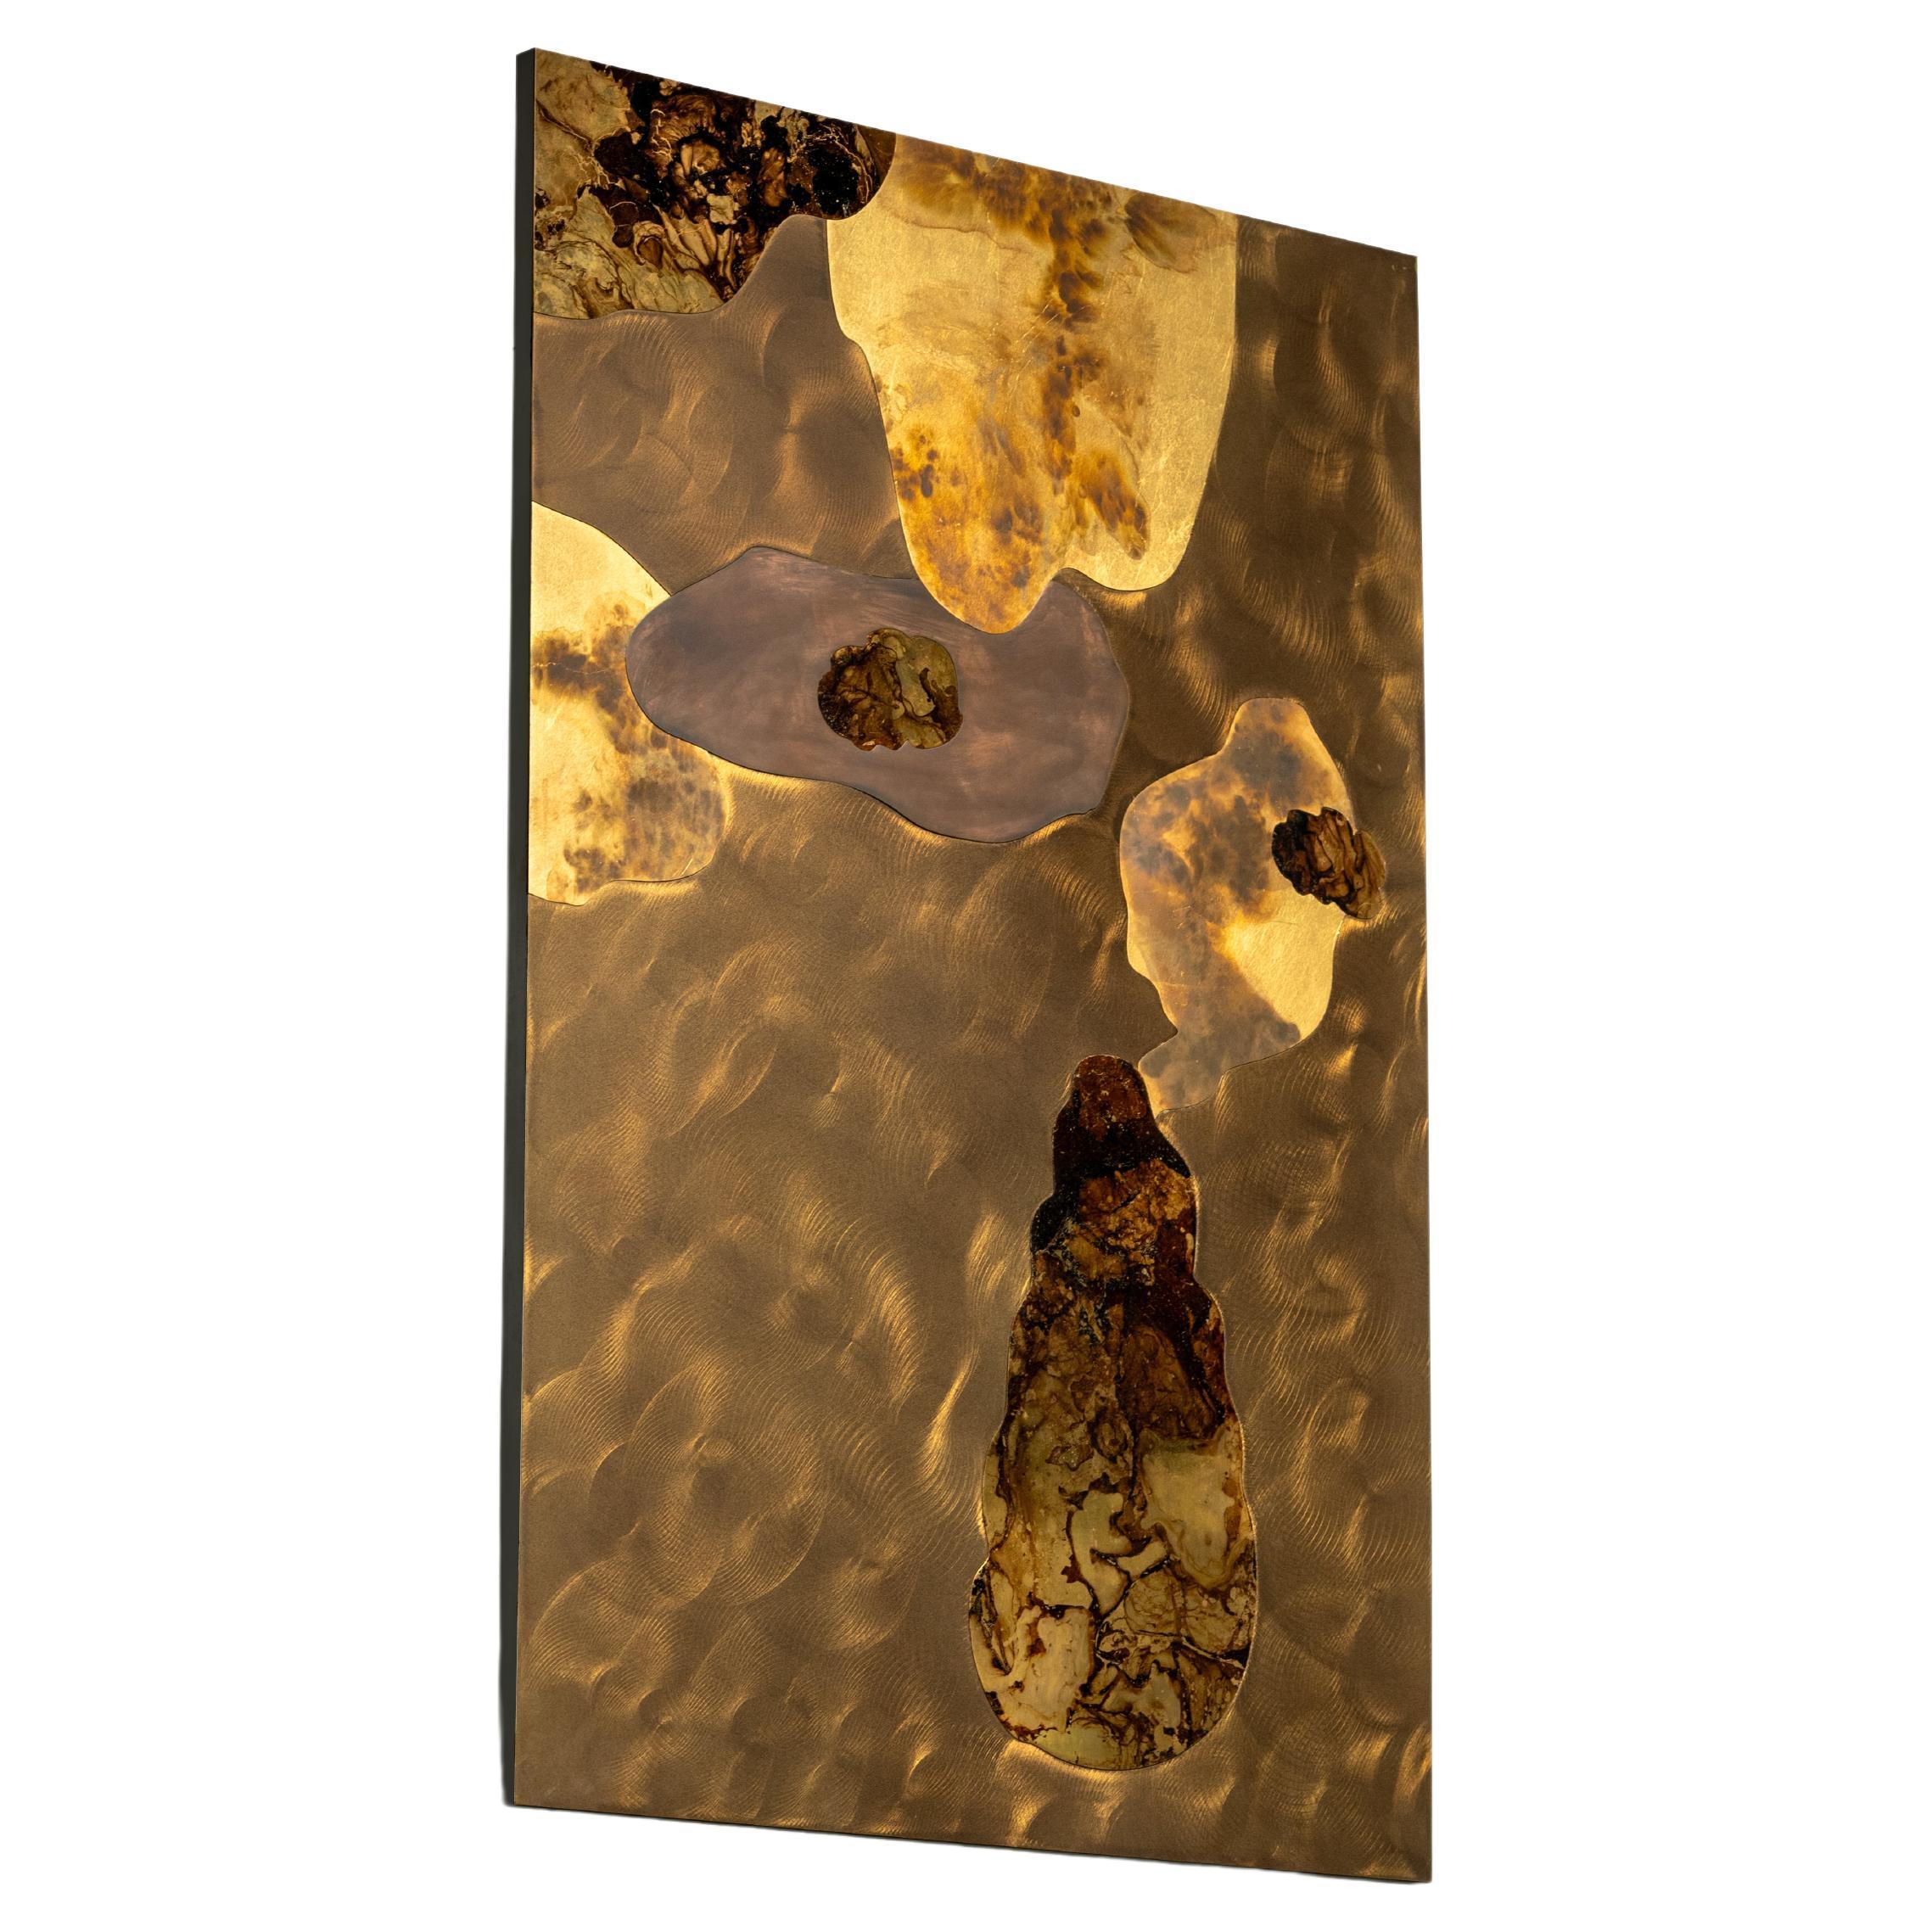 Limited Edition Nebula Wall Art I made in Pure Copper and Resin For Sale